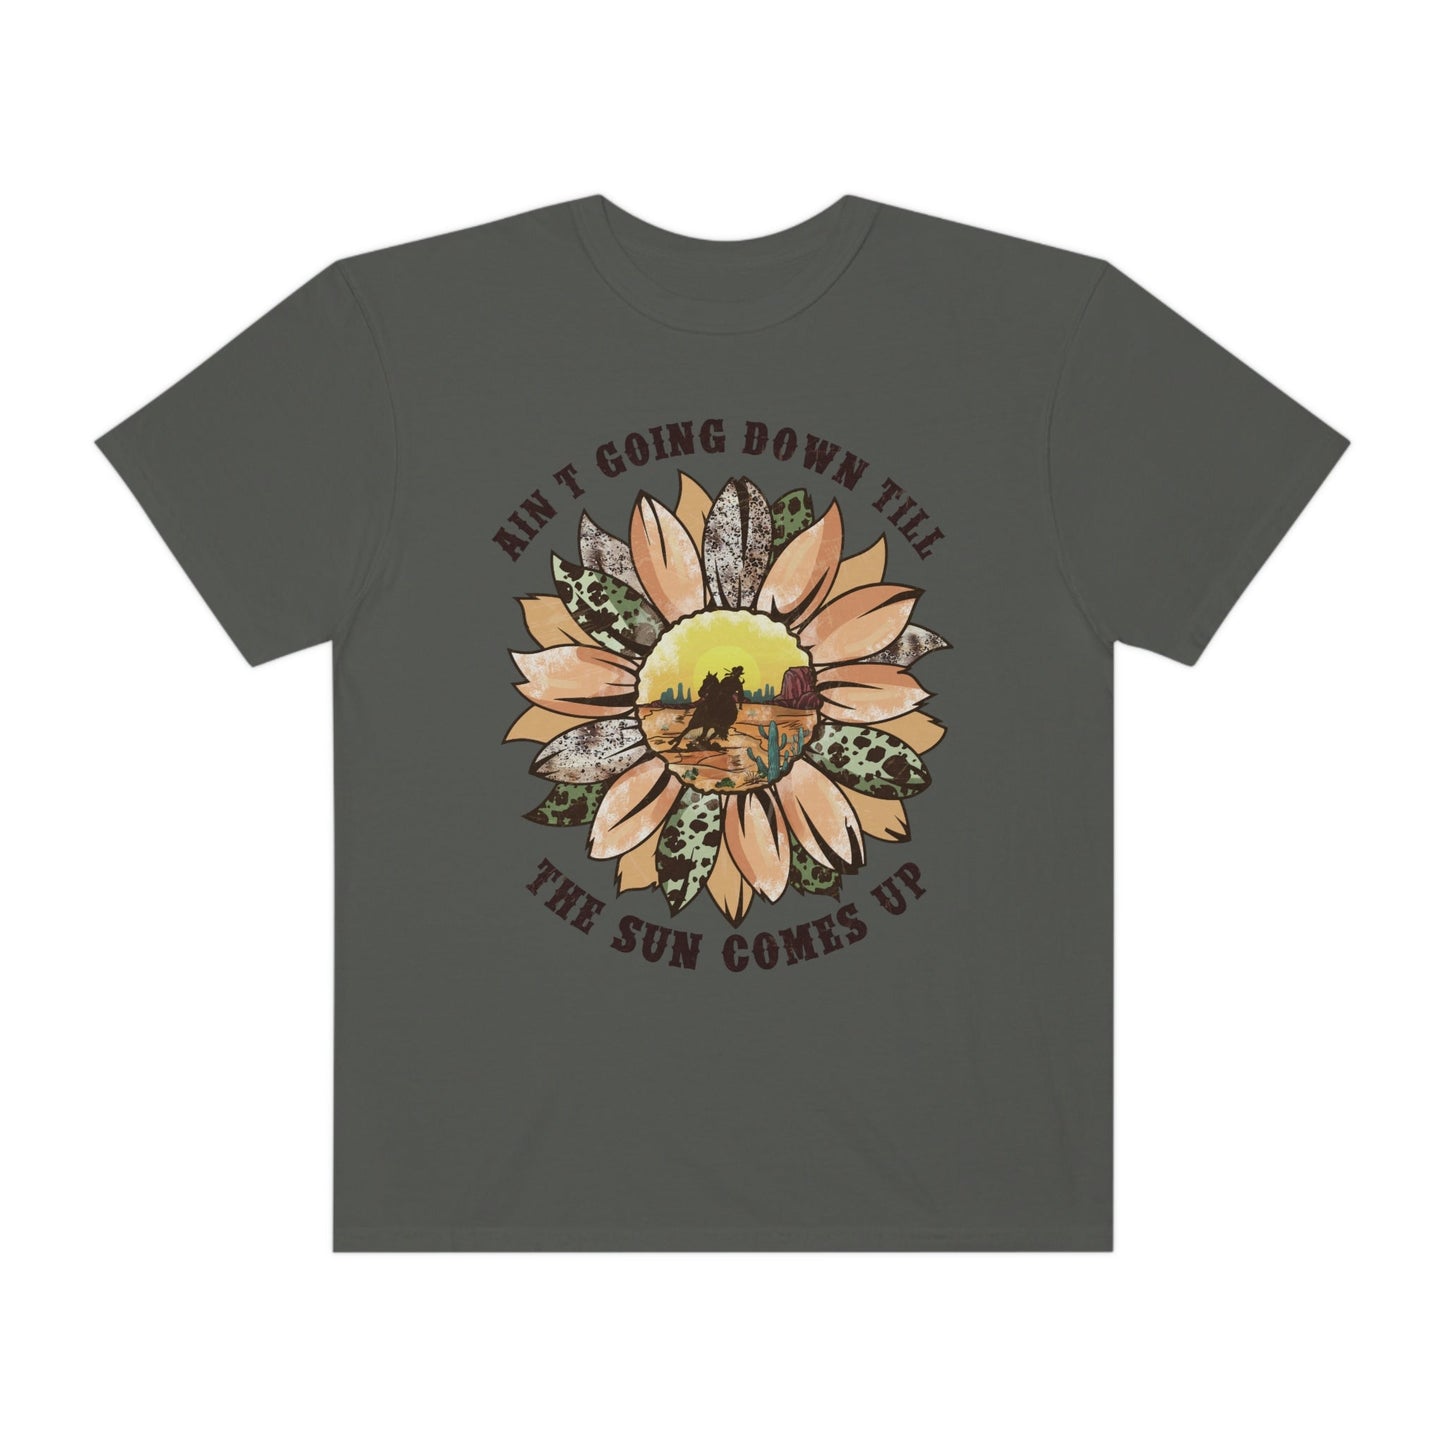 Ain't Going Down Til the Sun Comes Up, Comfort Colors Funny Western Graphic Tee | Sunflower Cowgirl T-Shirt